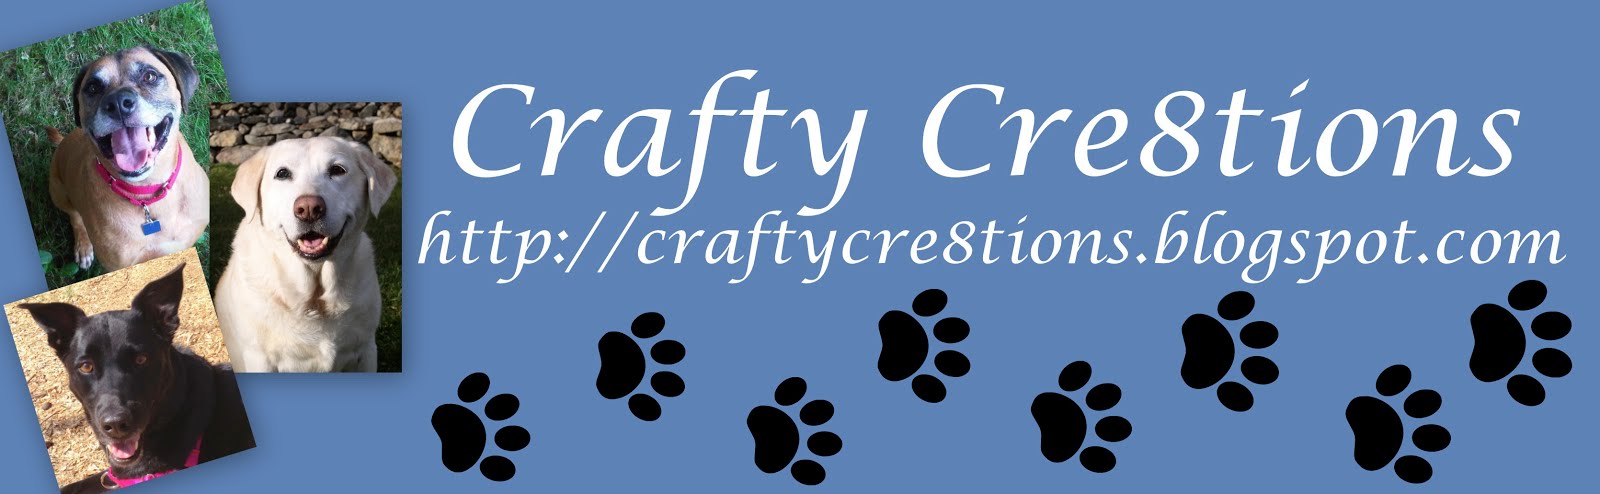 Crafty Cre8tions